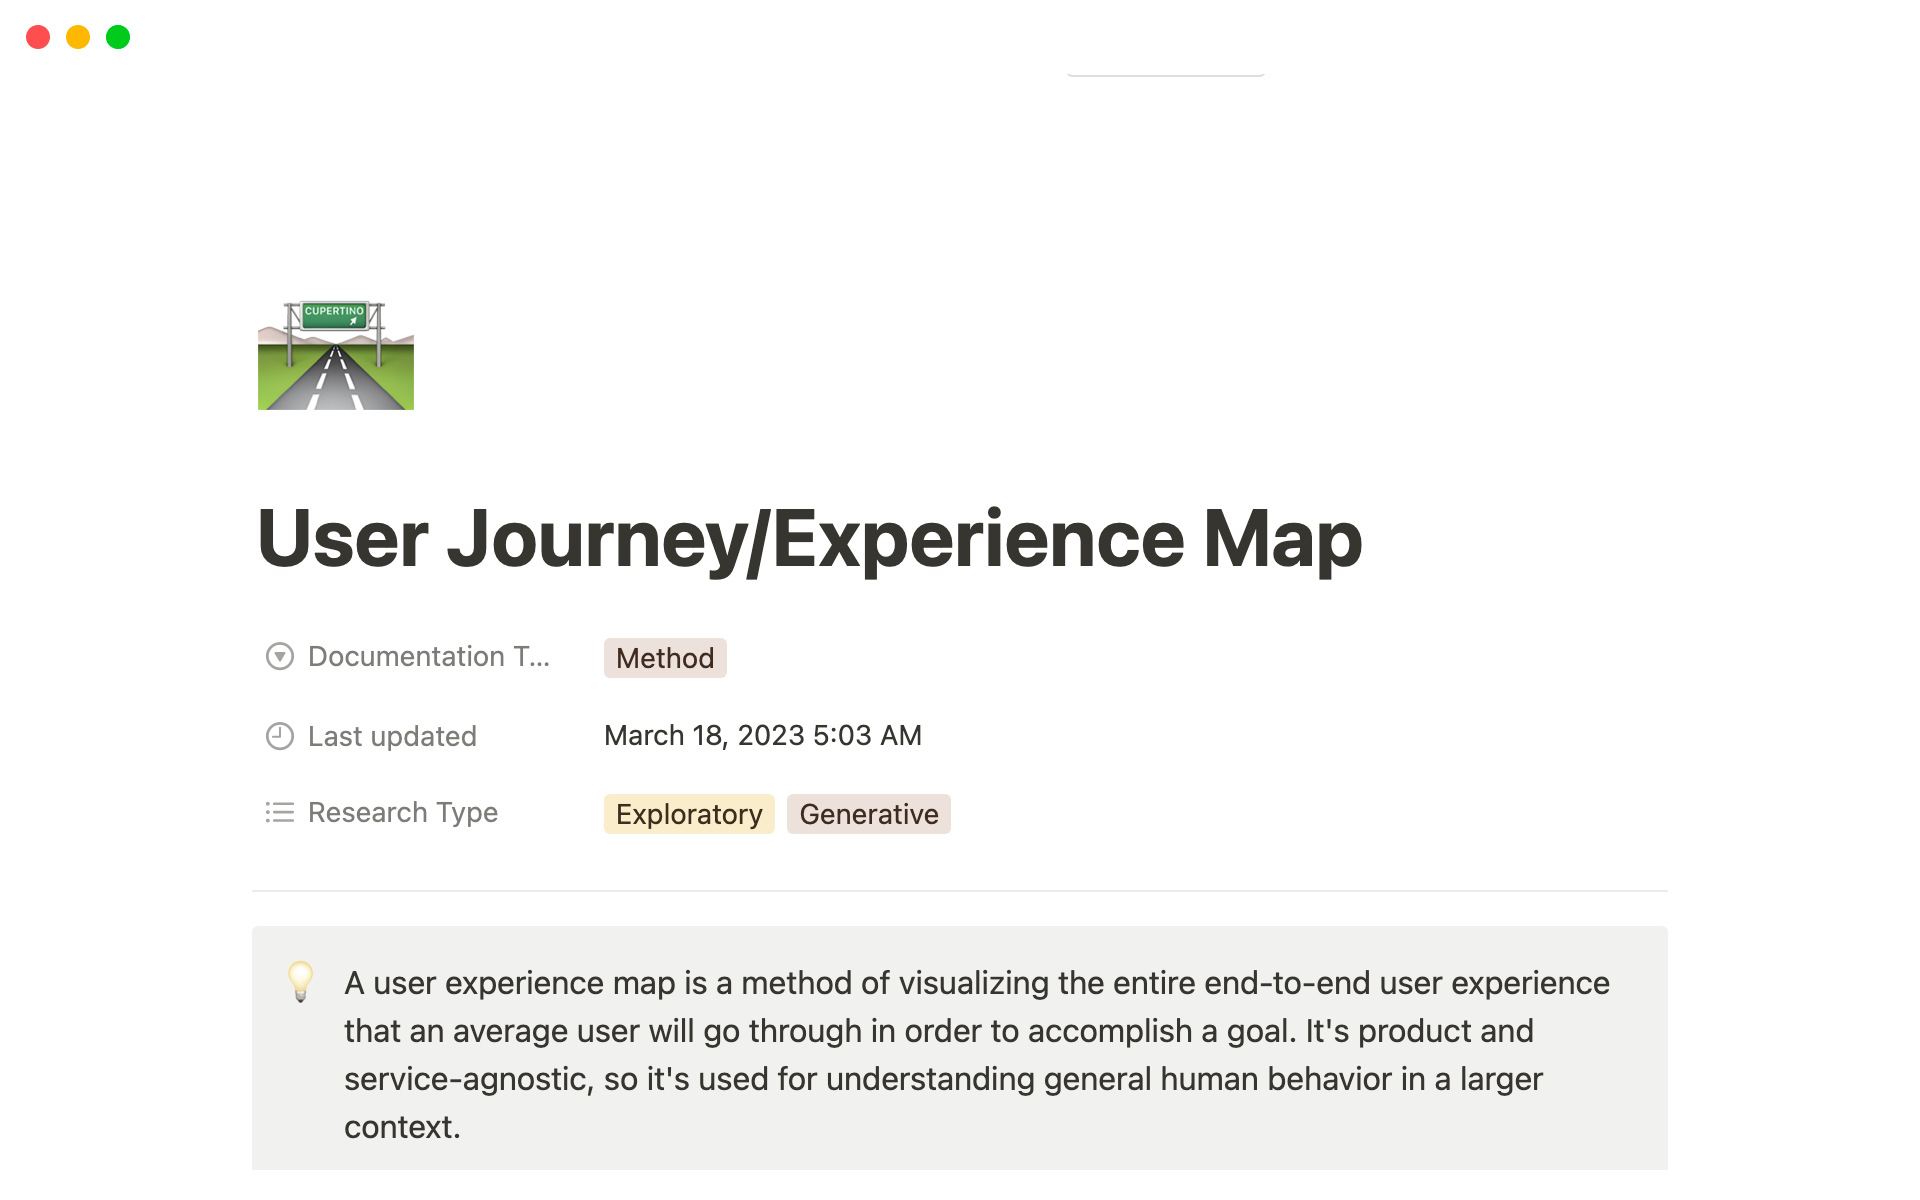 This template helps UX Researchers set up and plan for a UX map as part of their research project